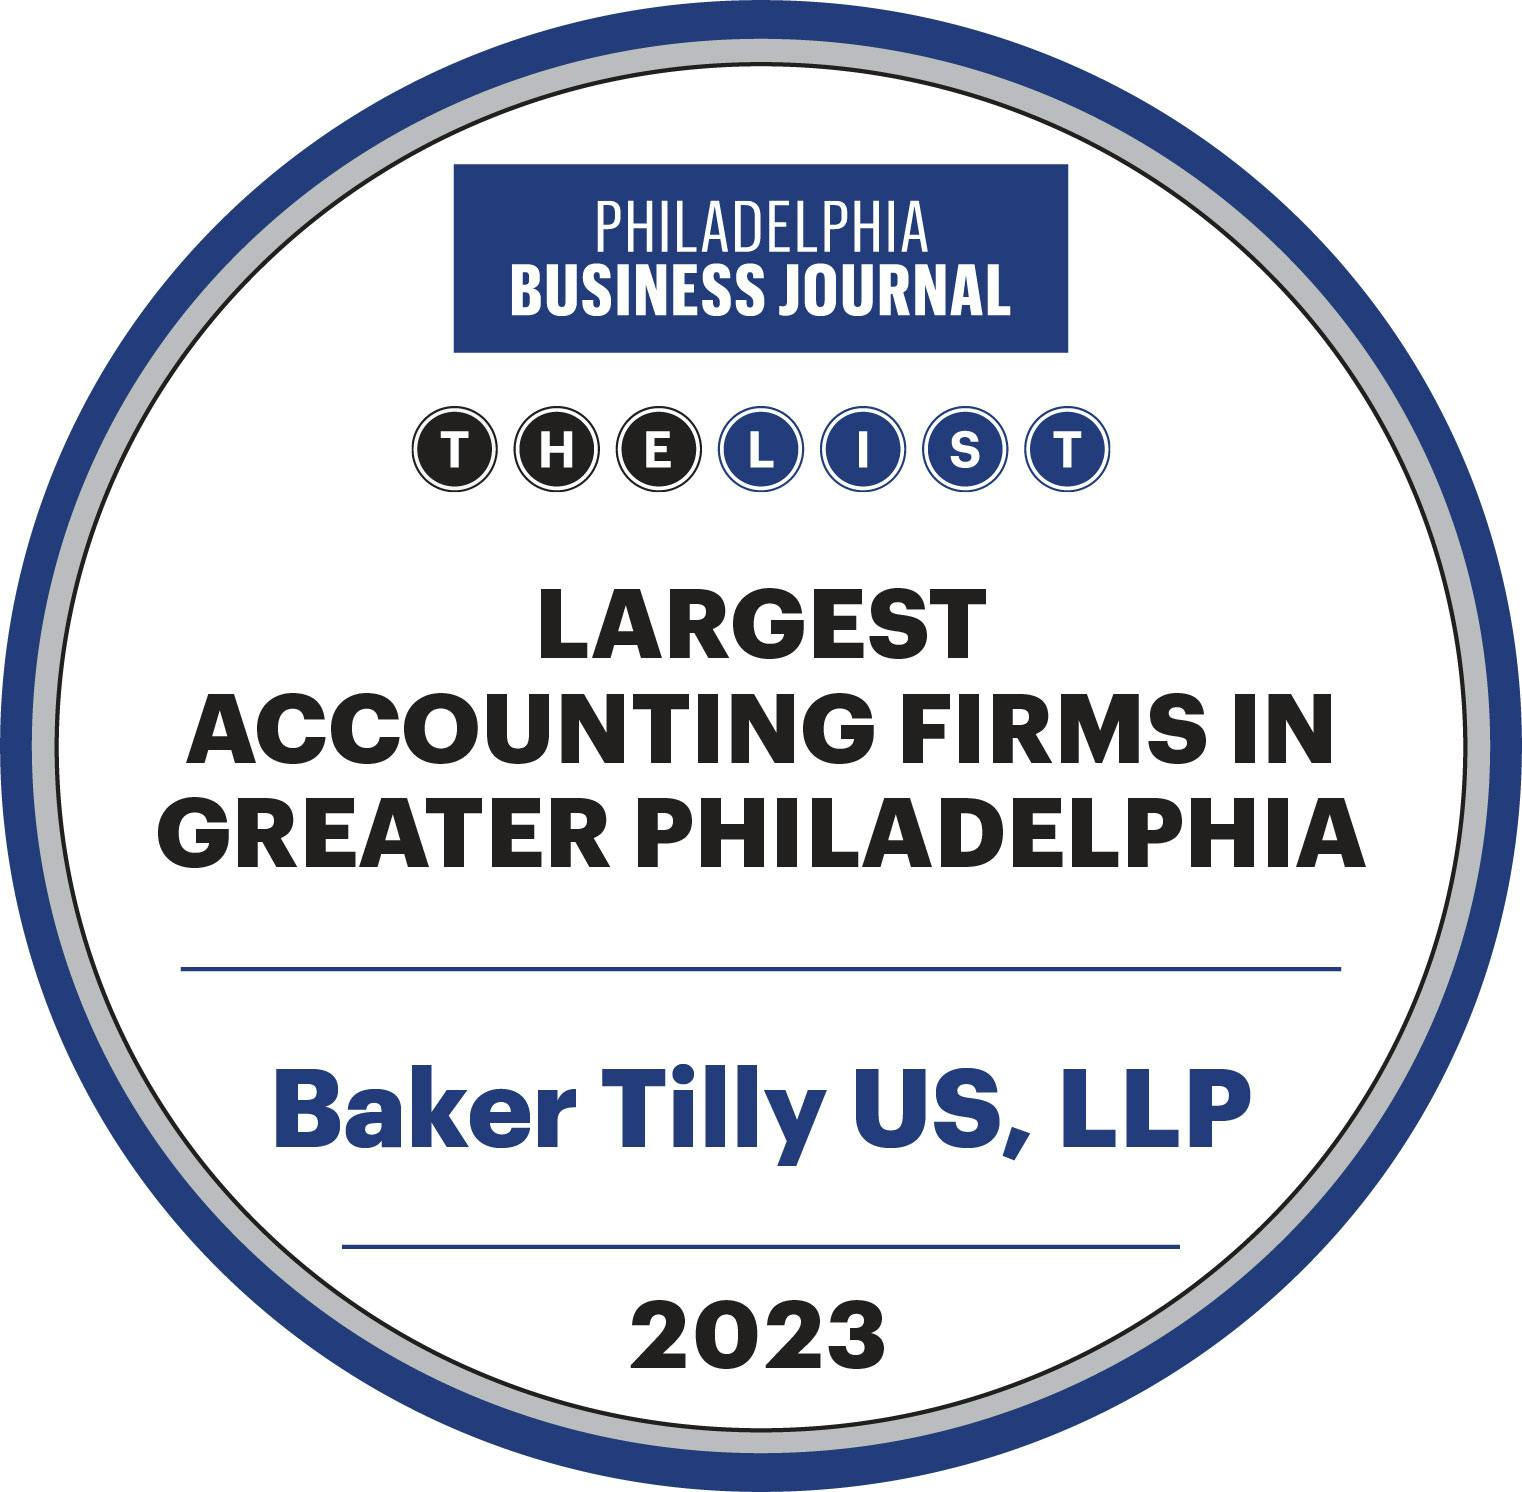 Largest Accounting Firms in Greater Philadelphia, Philadelphia Business Journal 2023 